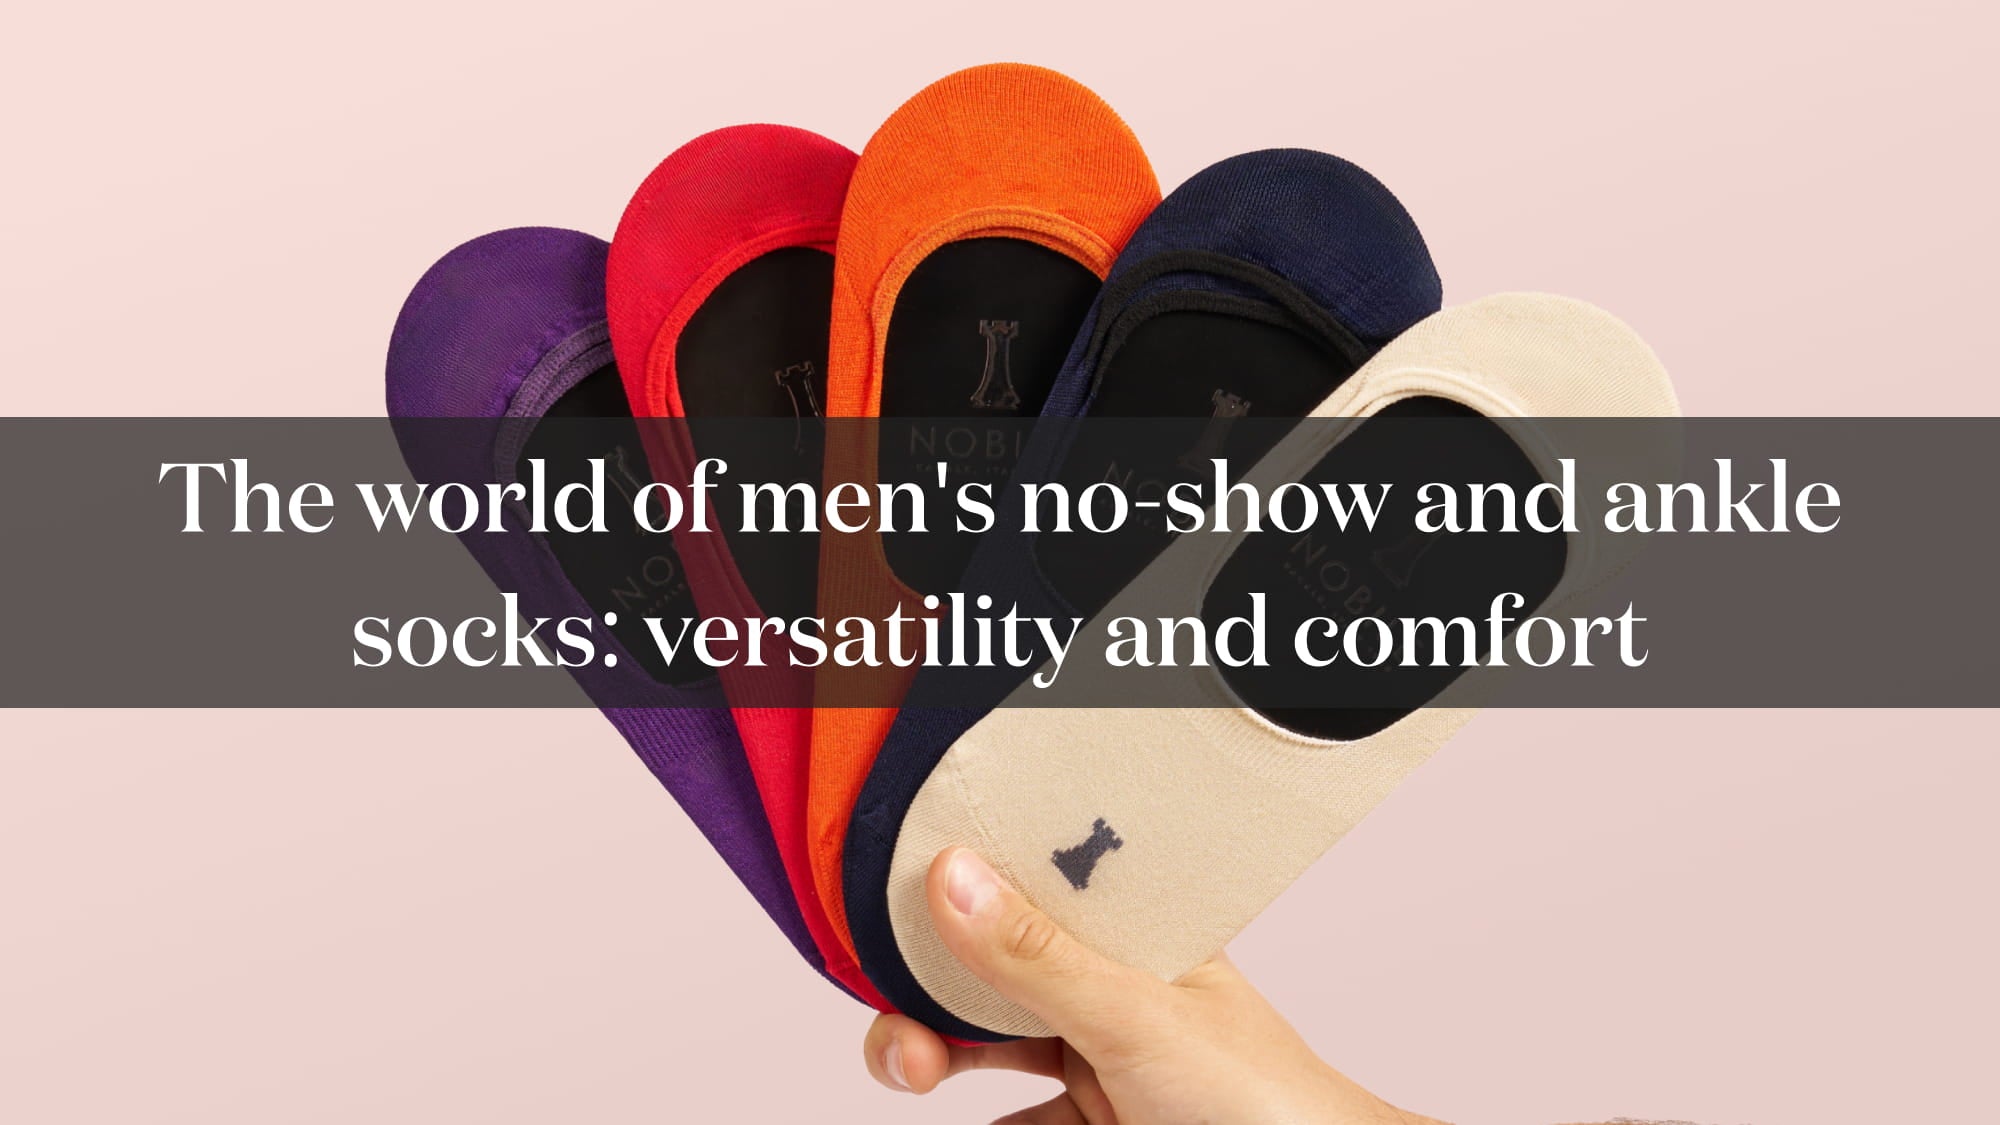 The world of men's no-show and ankle socks: versatility and comfort